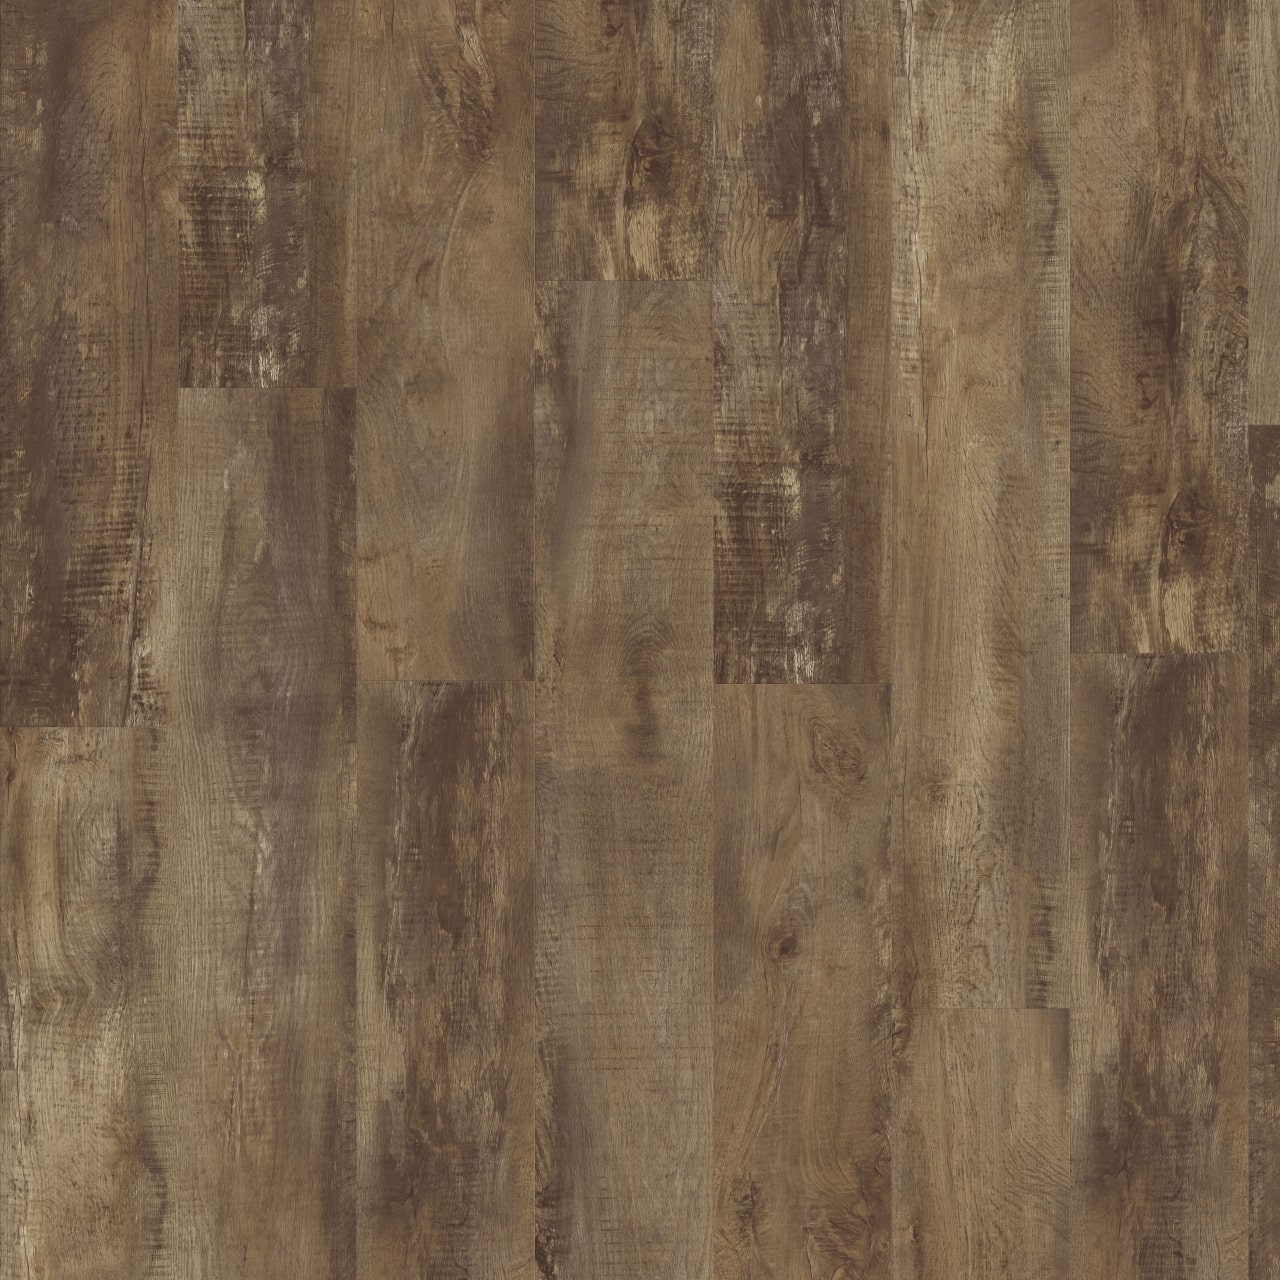 LayRed Country Oak 54875